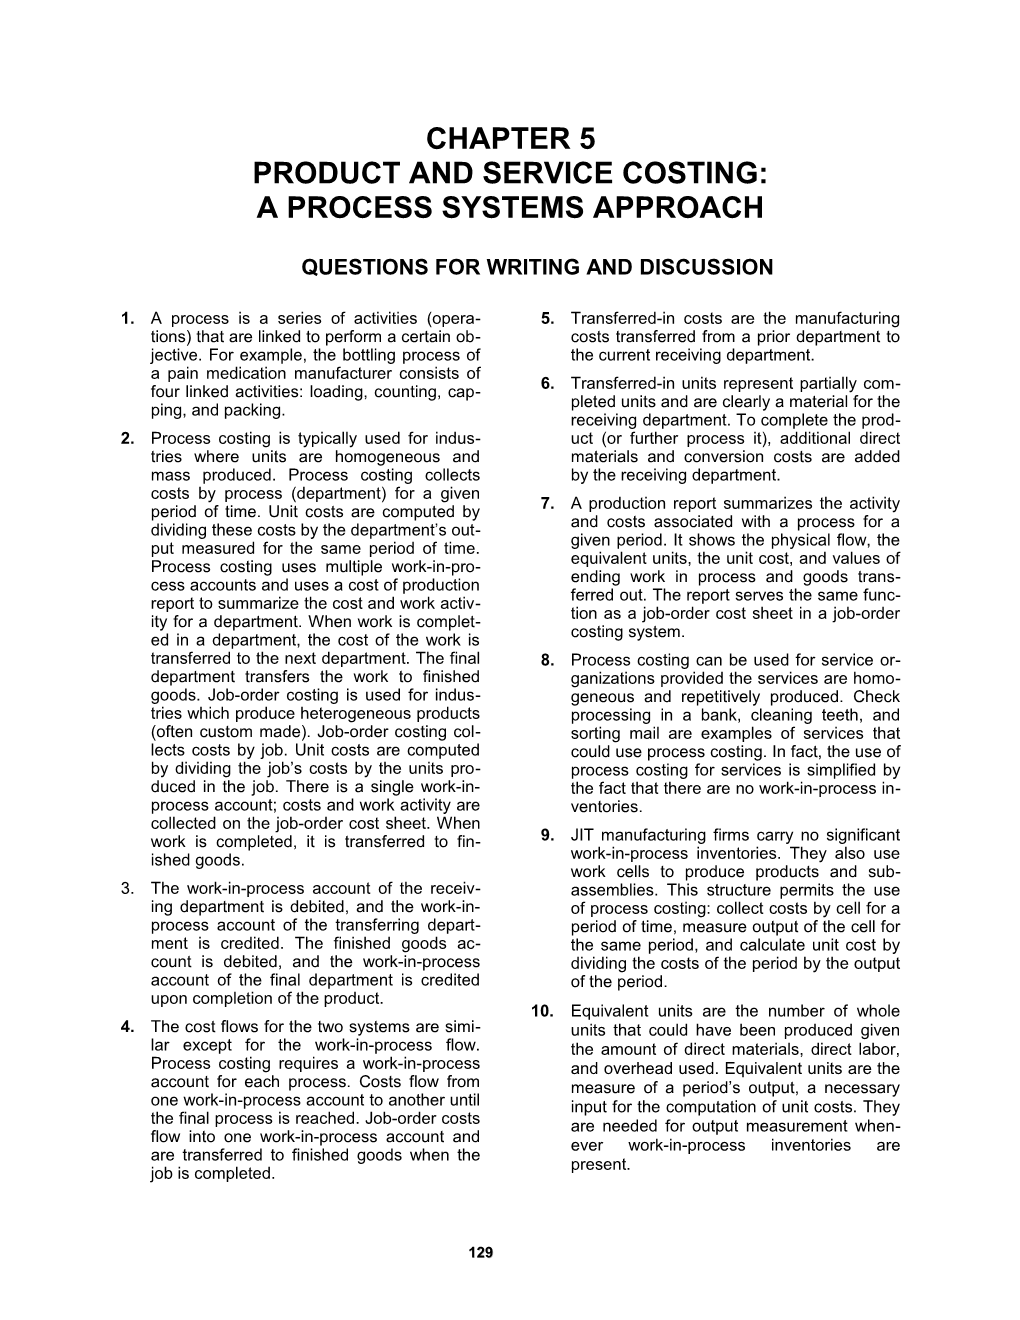 Chapter 5: Product and Service Costing; a Process Systems Approach